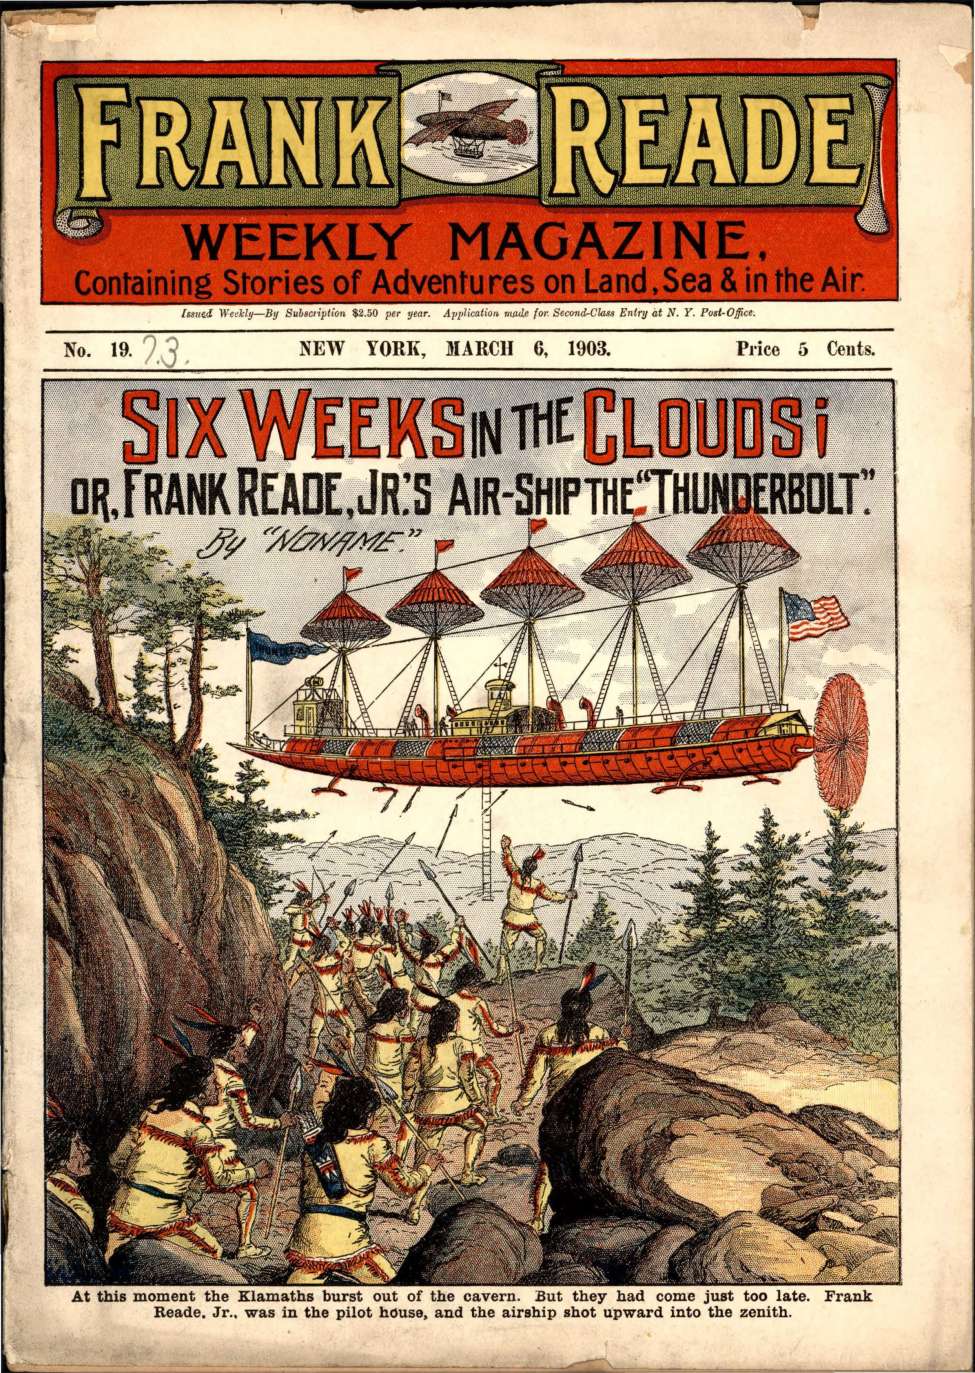 Book Cover For v1 19 - Six weeks in the Clouds